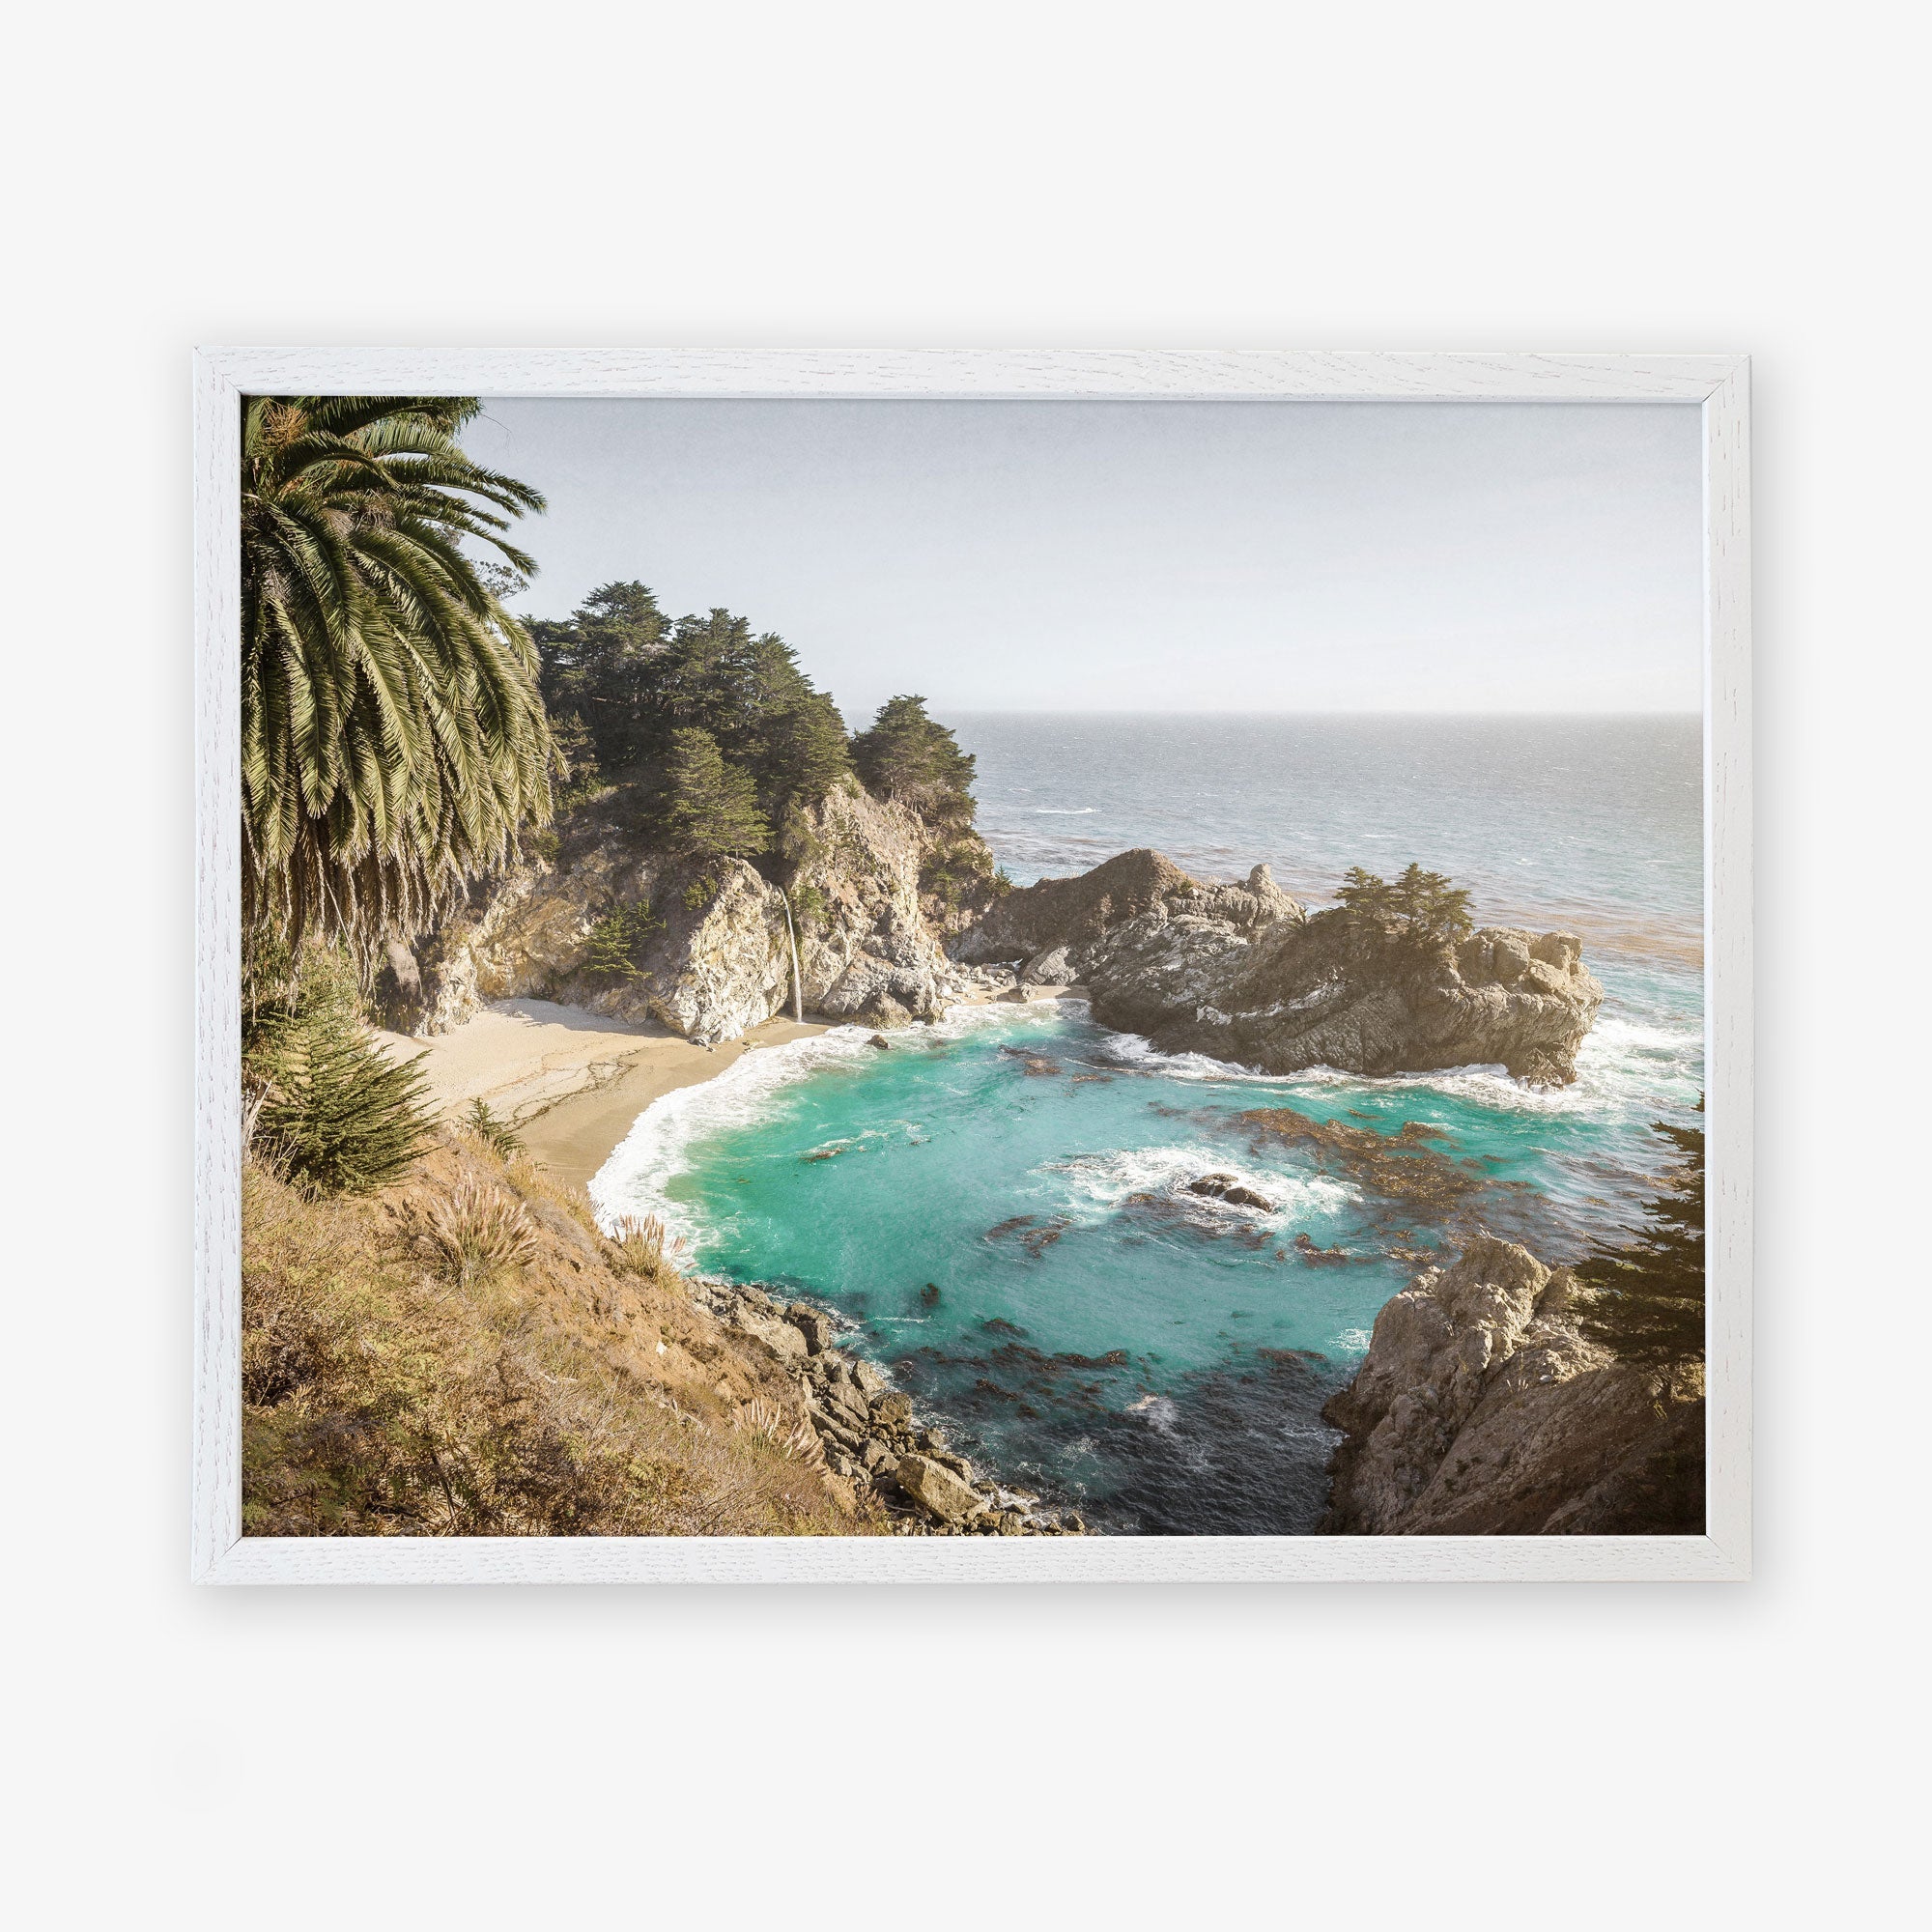 A framed aerial photograph of the Big Sur Coastal Print, &#39;Julia Pffeifer&#39; by Offley Green, on archival photographic paper, depicting a scenic coastal view with turquoise waters, rugged cliffs, and lush greenery under a hazy sky.